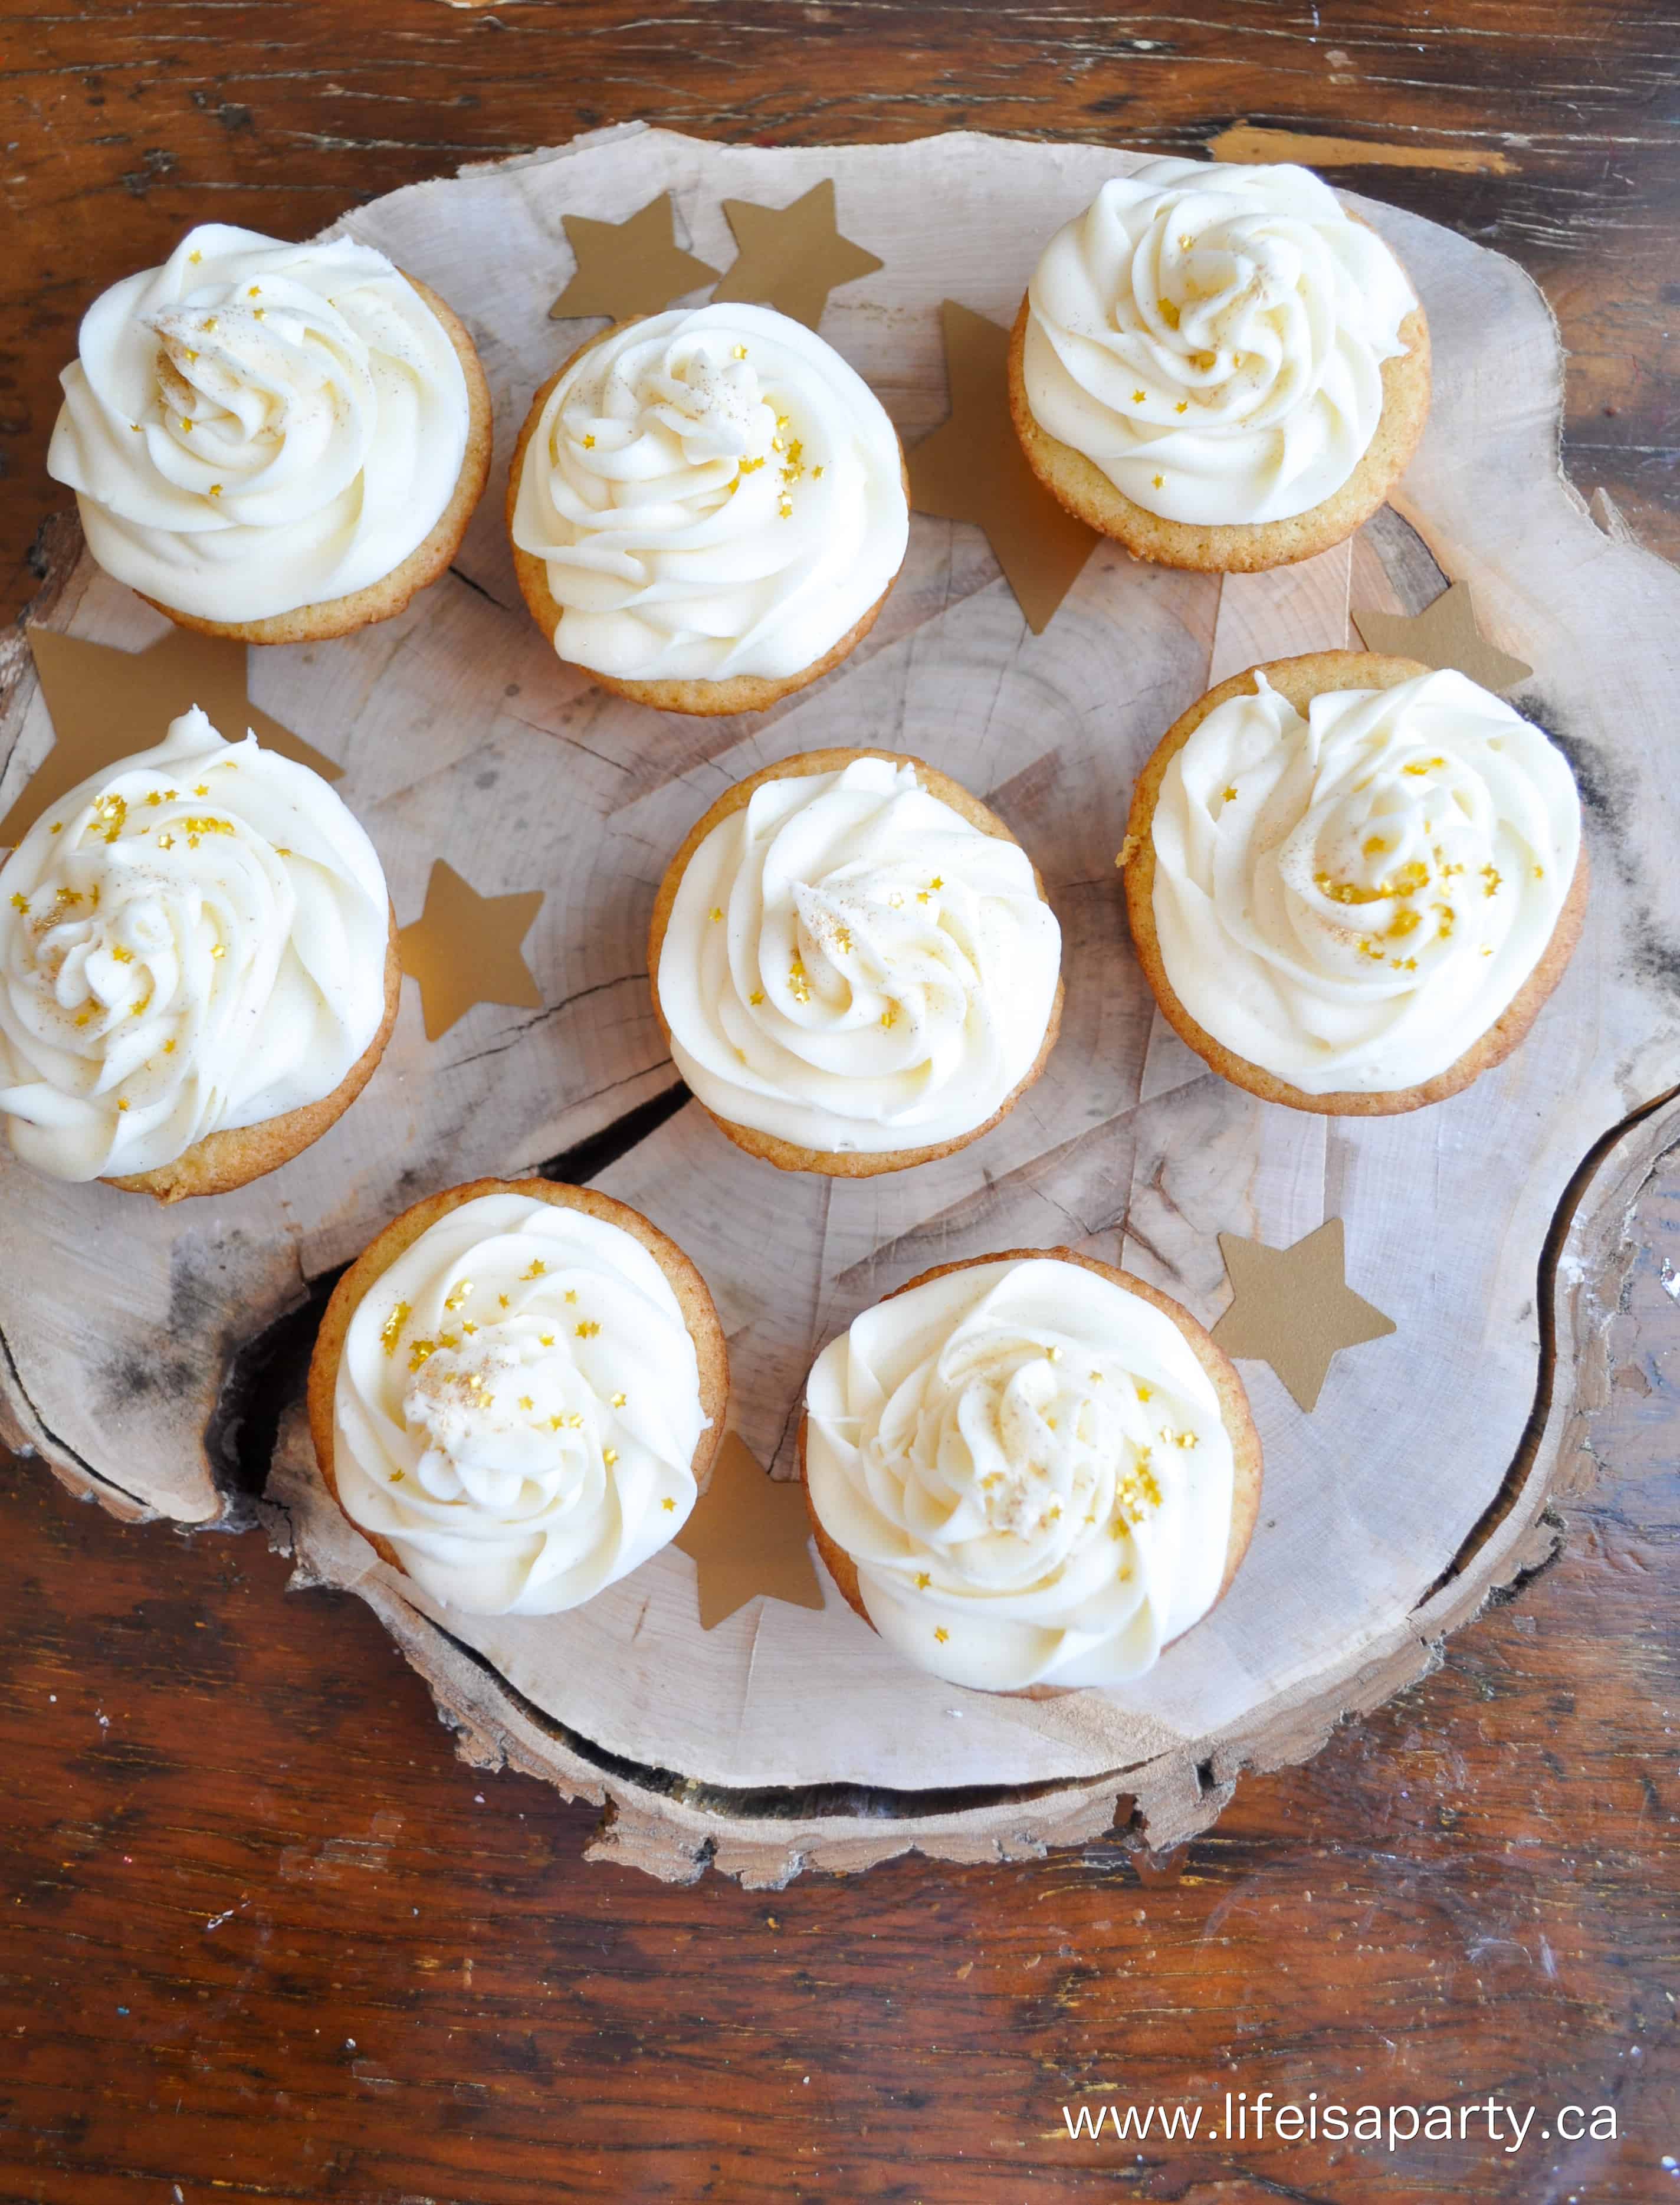 Eggnog Cupcakes: regular vanilla cupcakes are taken up a notch for Christmas our eggnog icing recipe. Perfect for holiday get togethers.